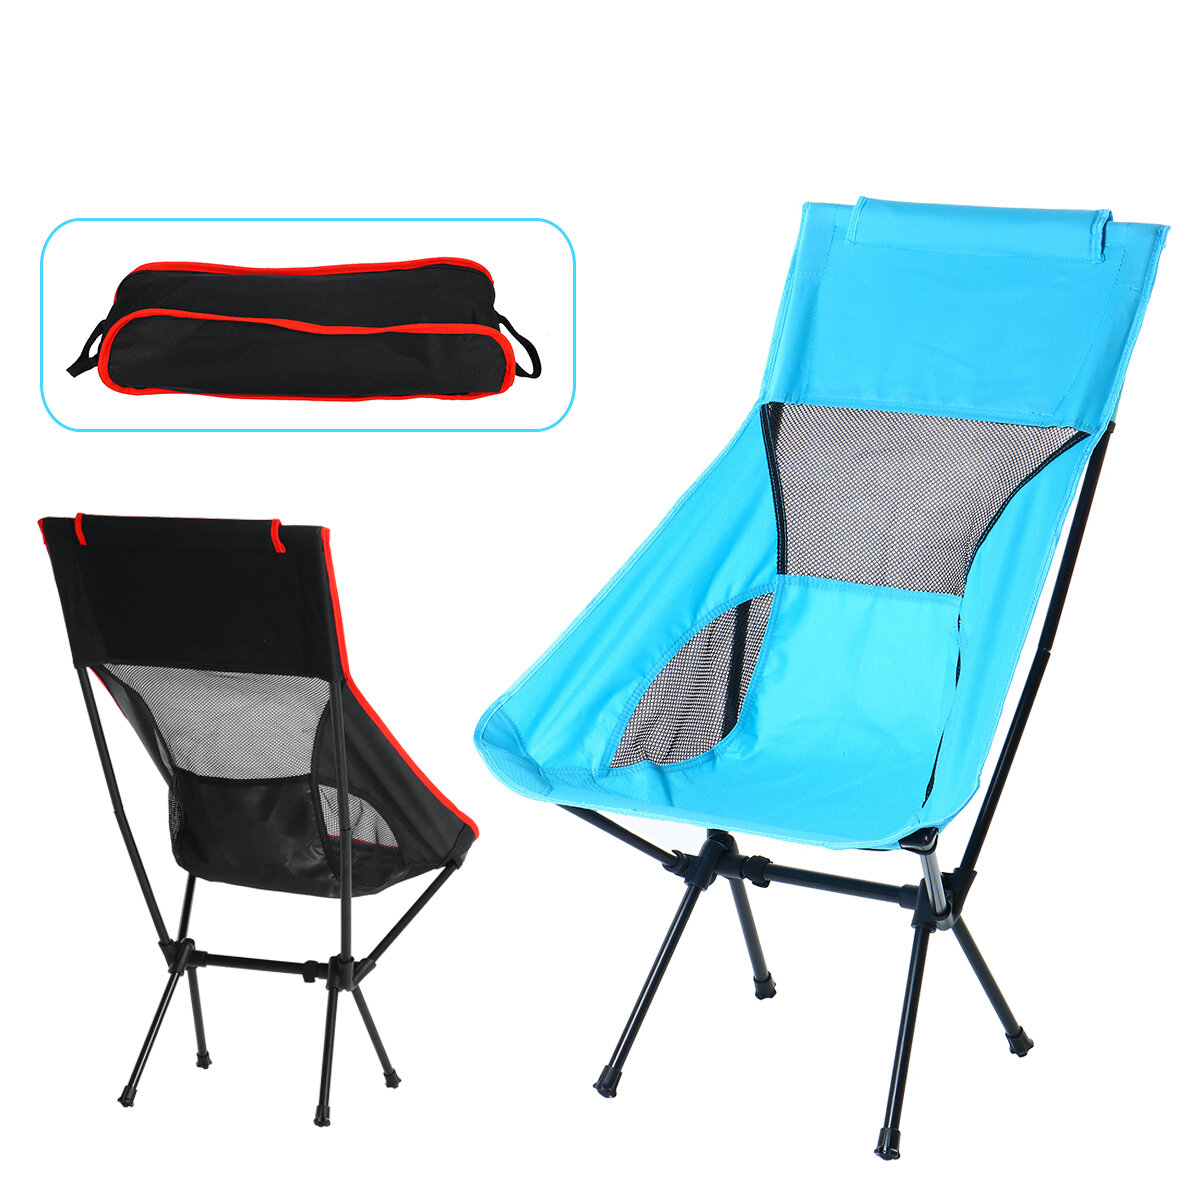 Outdoor Camping Chair Oxford Cloth Portable Folding Lengthen Camping Ultralight Chair Seat for Fishi